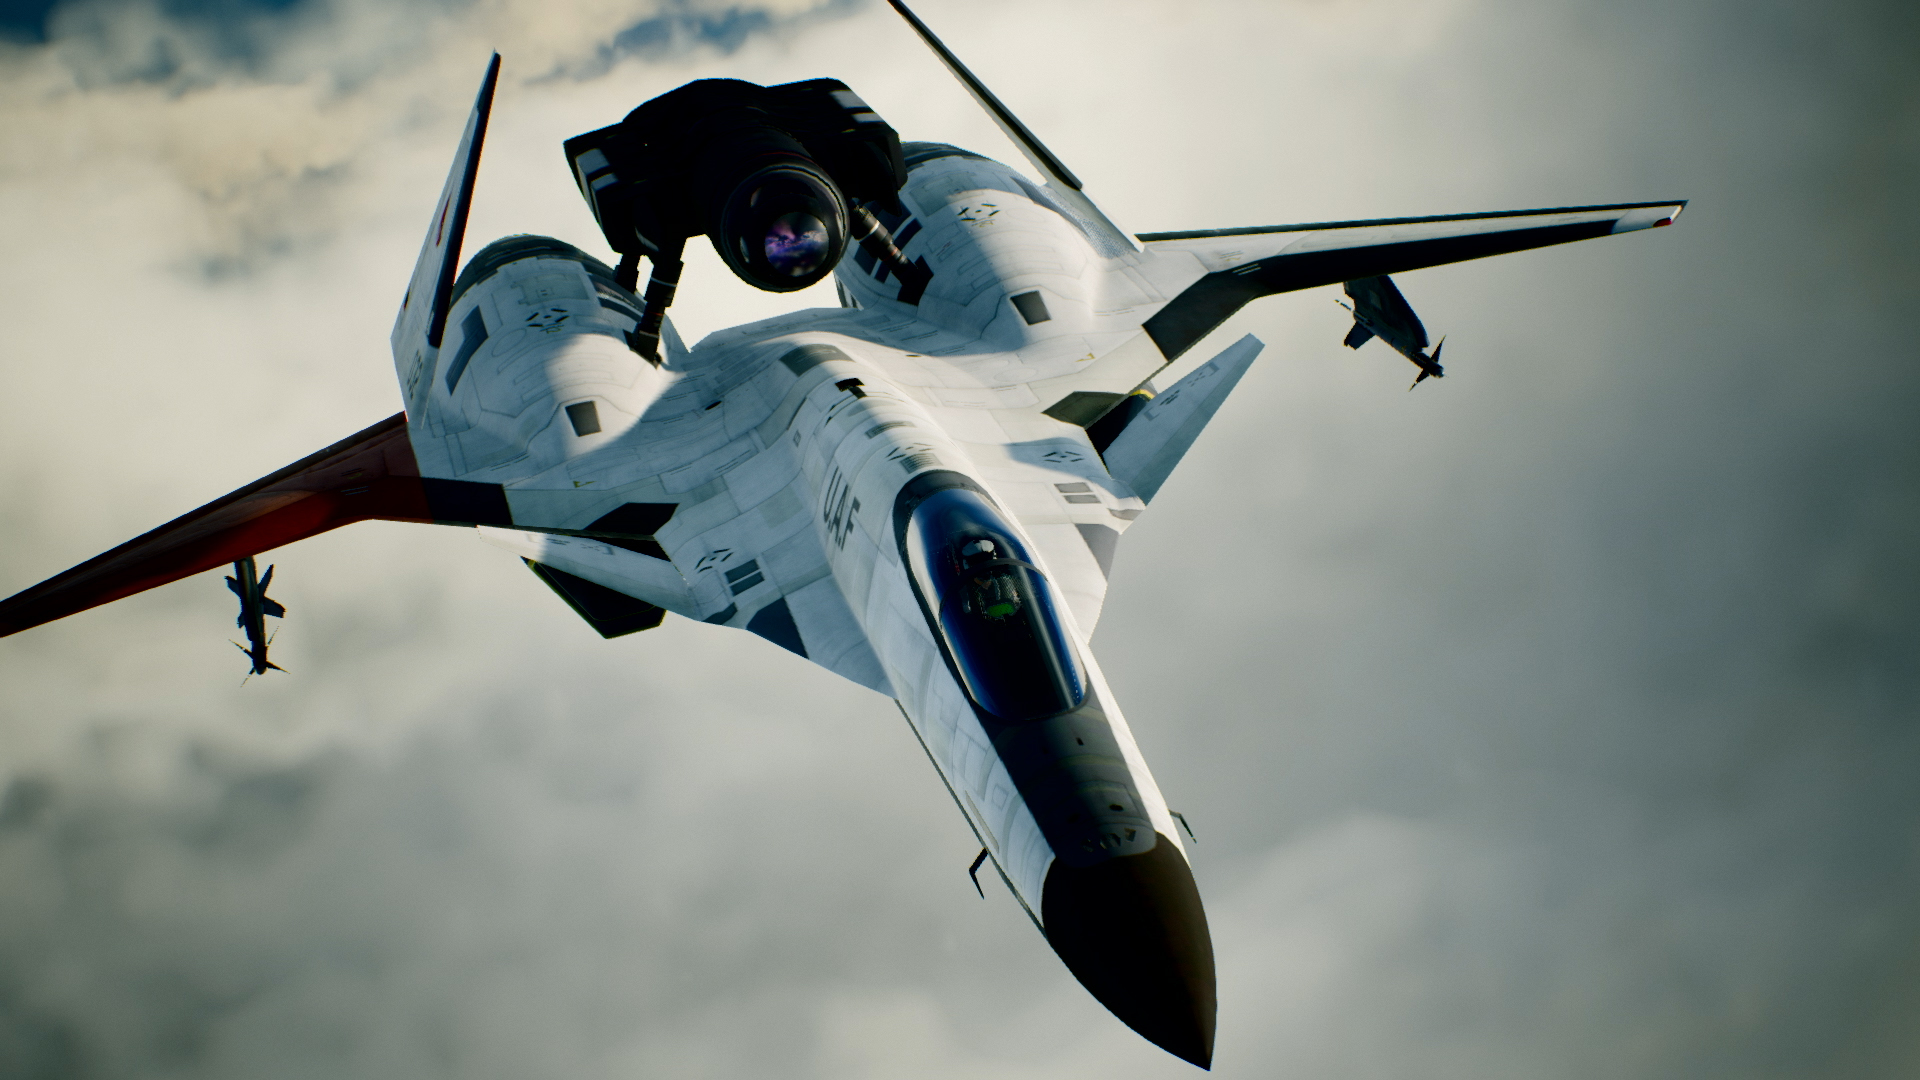 ace combat 7 special edition